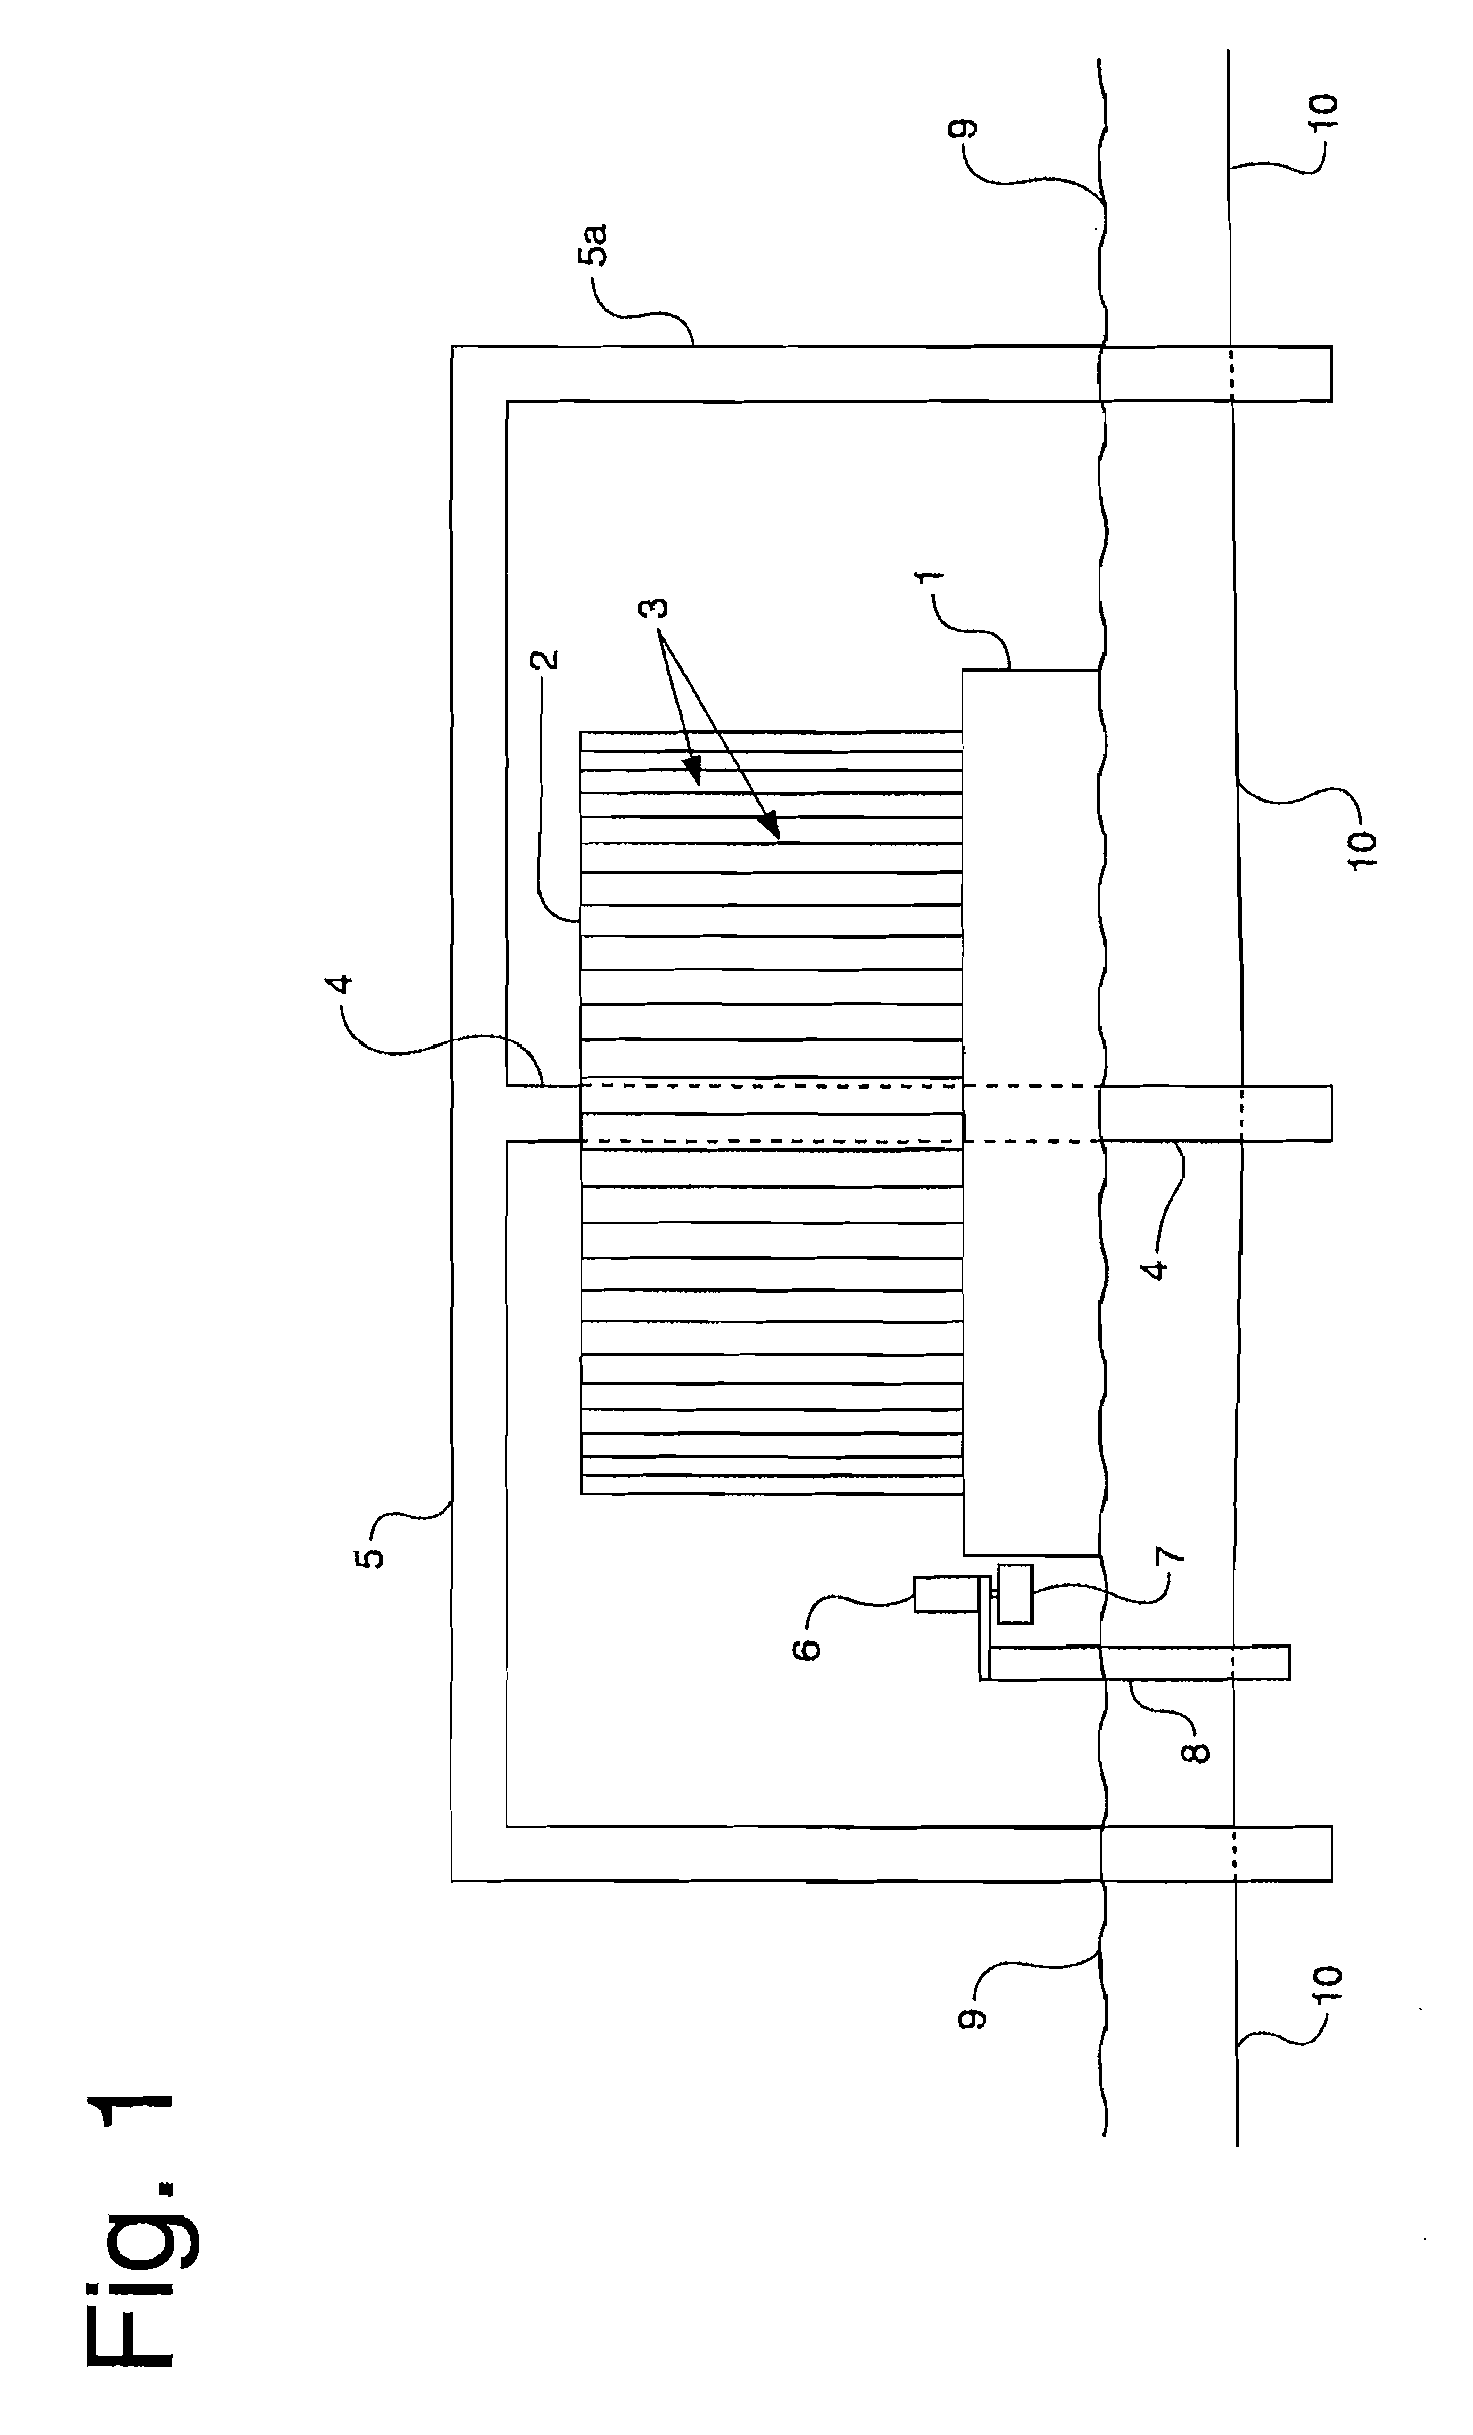 Reduced Friction Wind Turbine Apparatus and Method